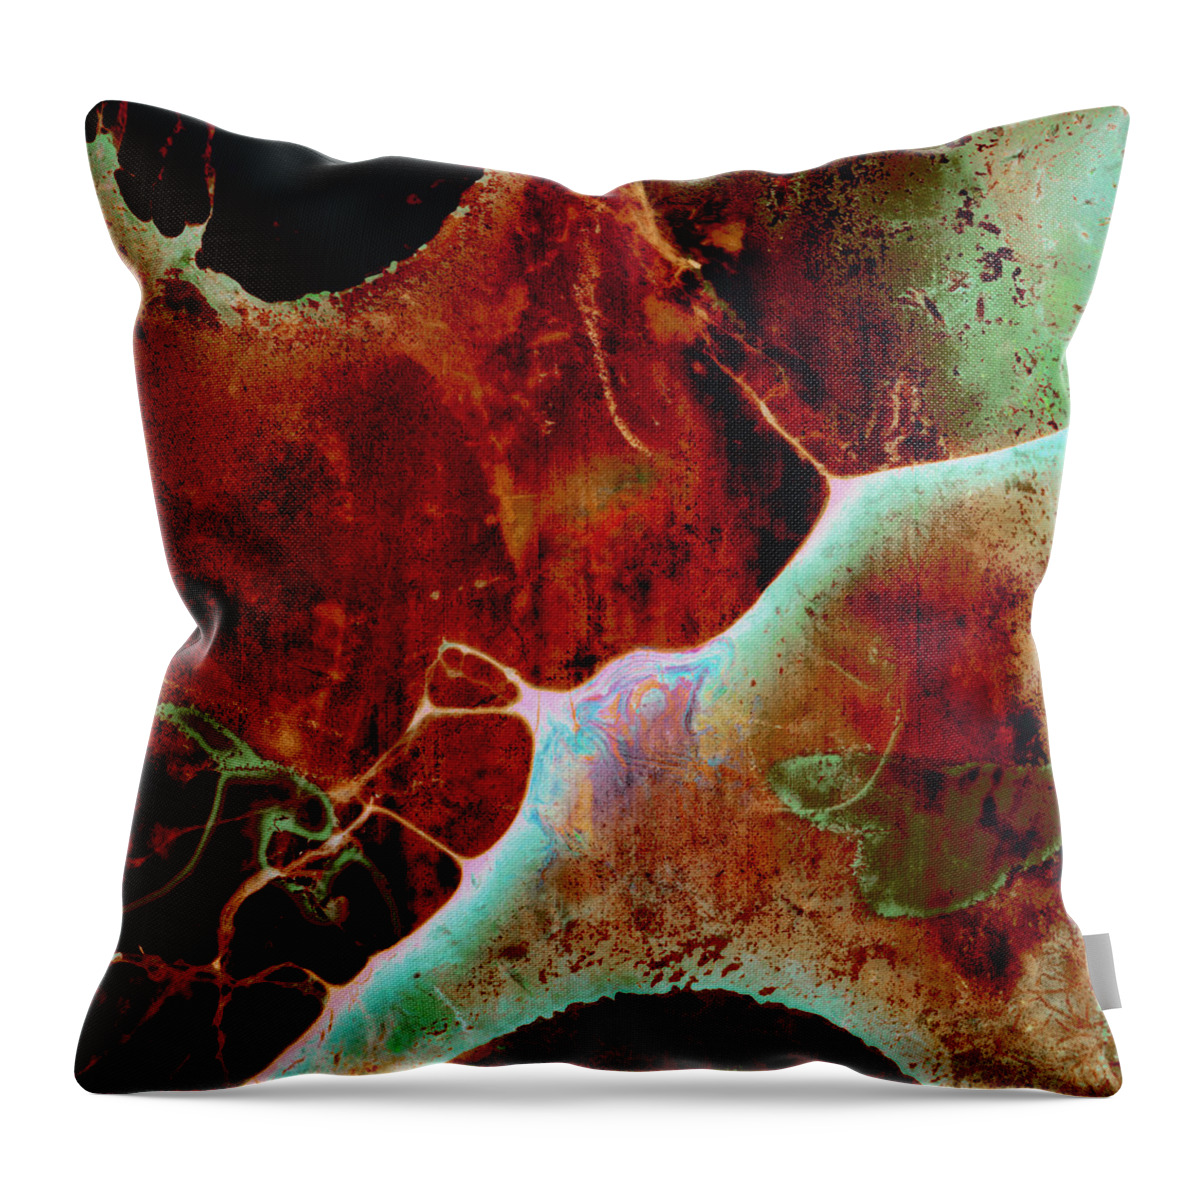 Chemical Reaction Throw Pillow featuring the photograph Splatter Grunge Wallpaper by Jitalia17